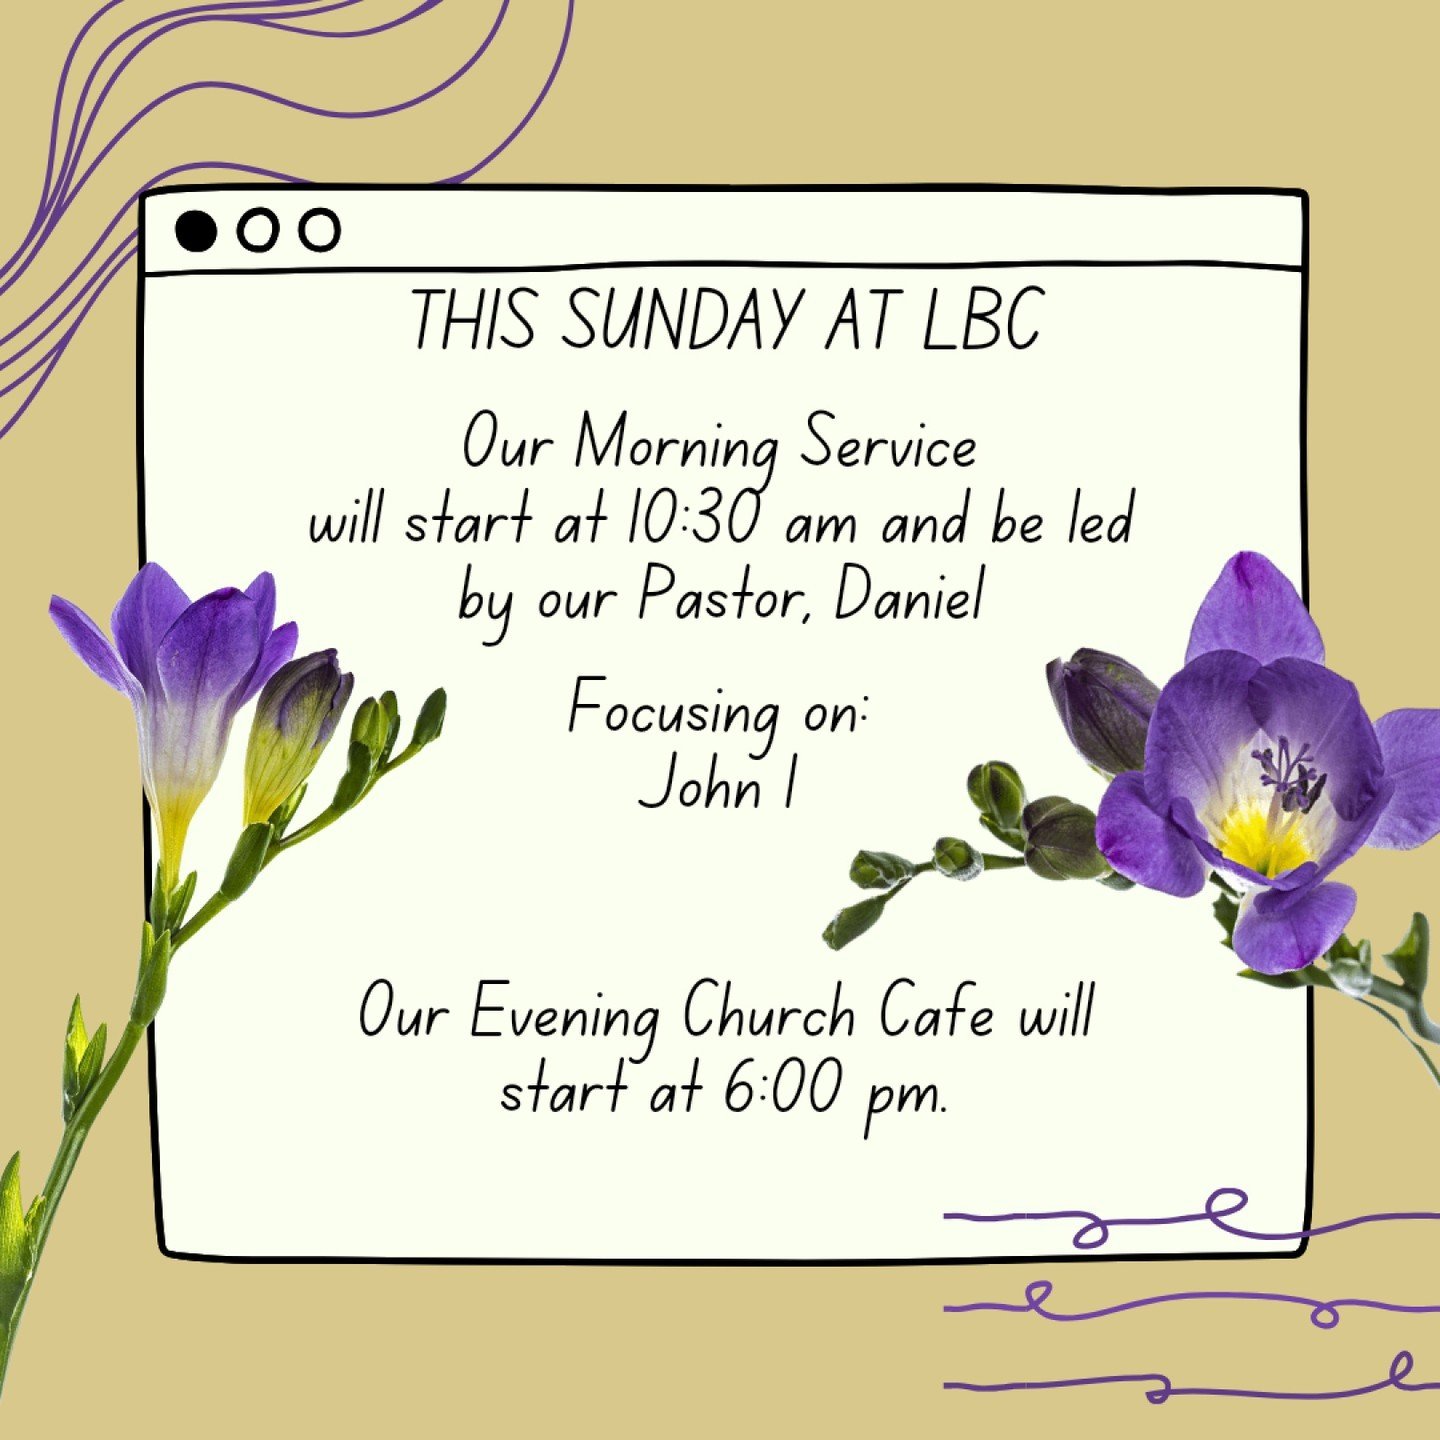 Please join us this Sunday at Lincoln Baptist Church  from 10:00 am for refreshments and fellowship before the service starts at 10:30am where our Pastor, Daniel will be focusing on John 1, recapping our series on John.

And join us again in the even